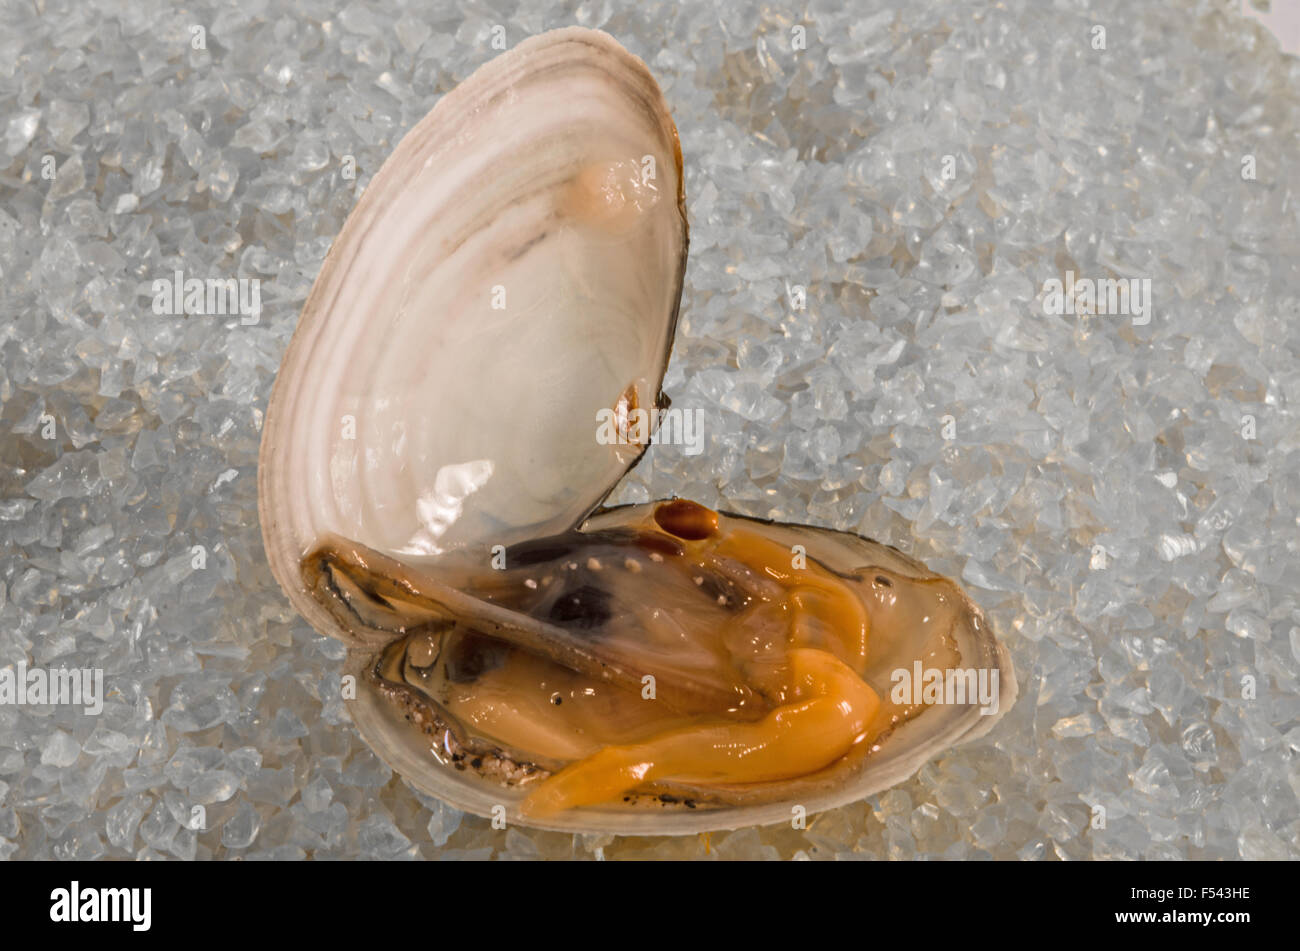 Bivalve clam used to eat after cooking or without cooking as it is Stock Photo